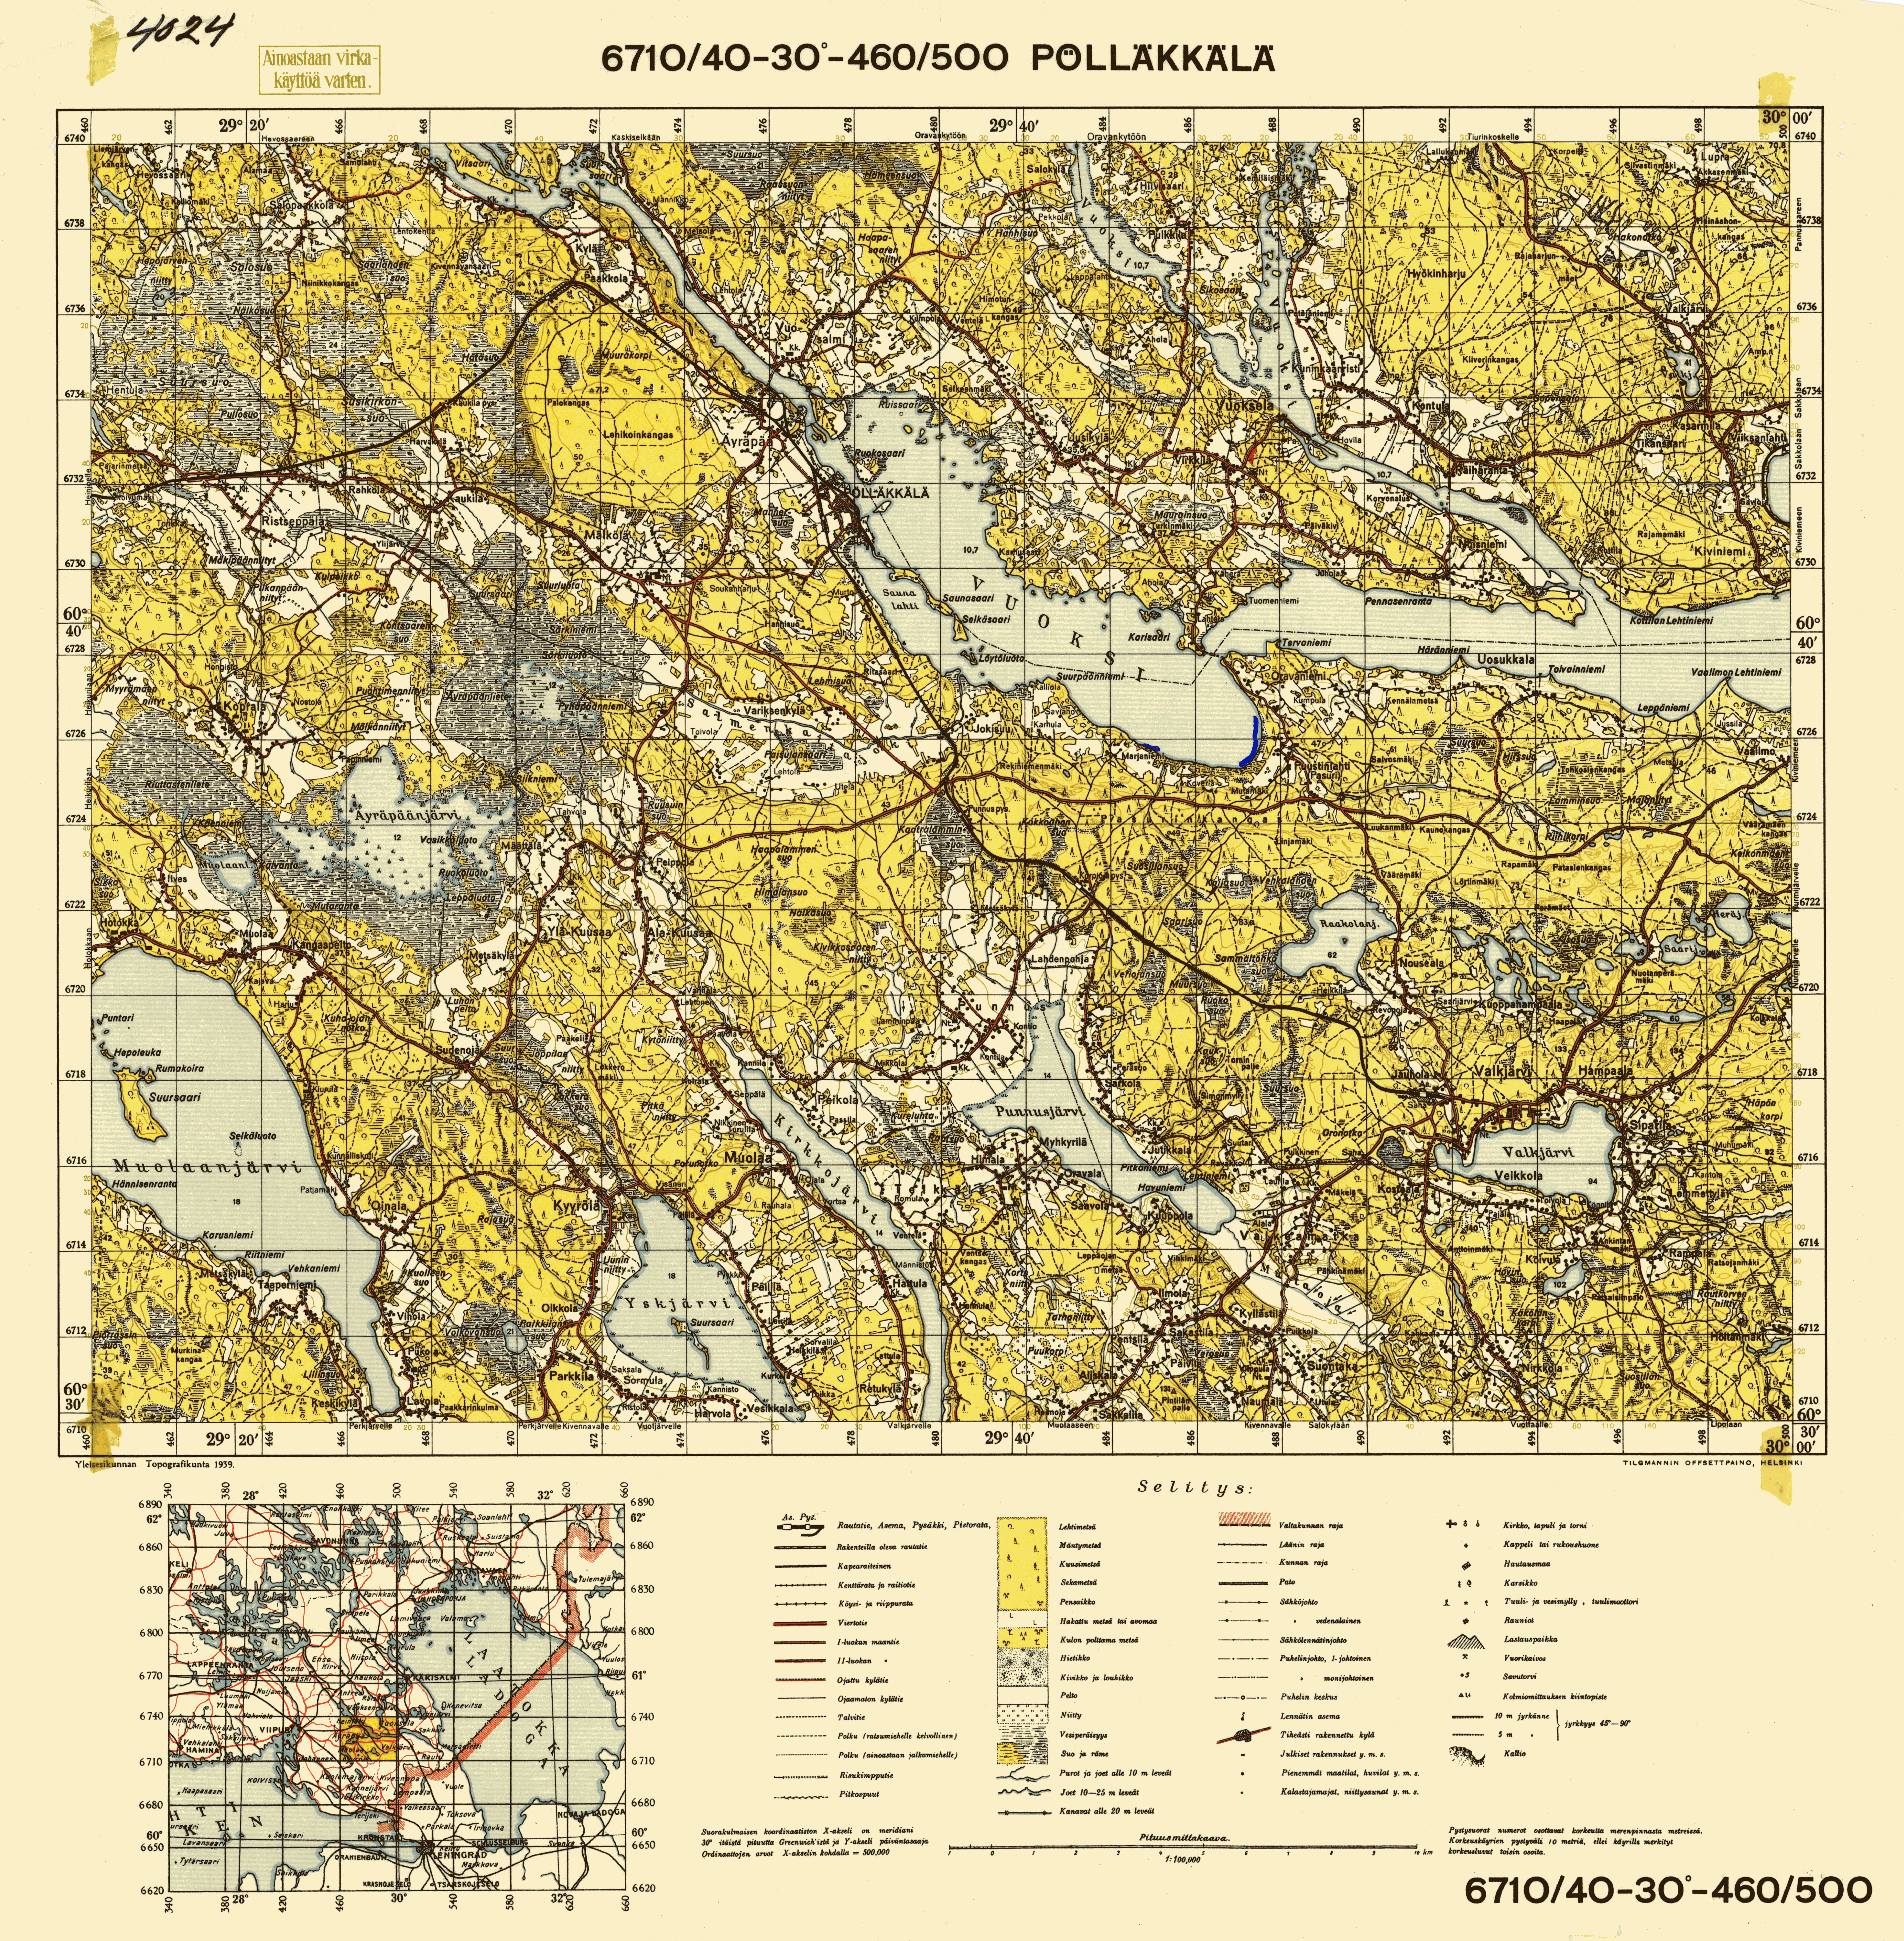 Baryševo. Pölläkkälä. Topografikartta 4024. Topographic map from 1939. Use the zooming tool to explore in higher level of detail. Obtain as a quality print or high resolution image